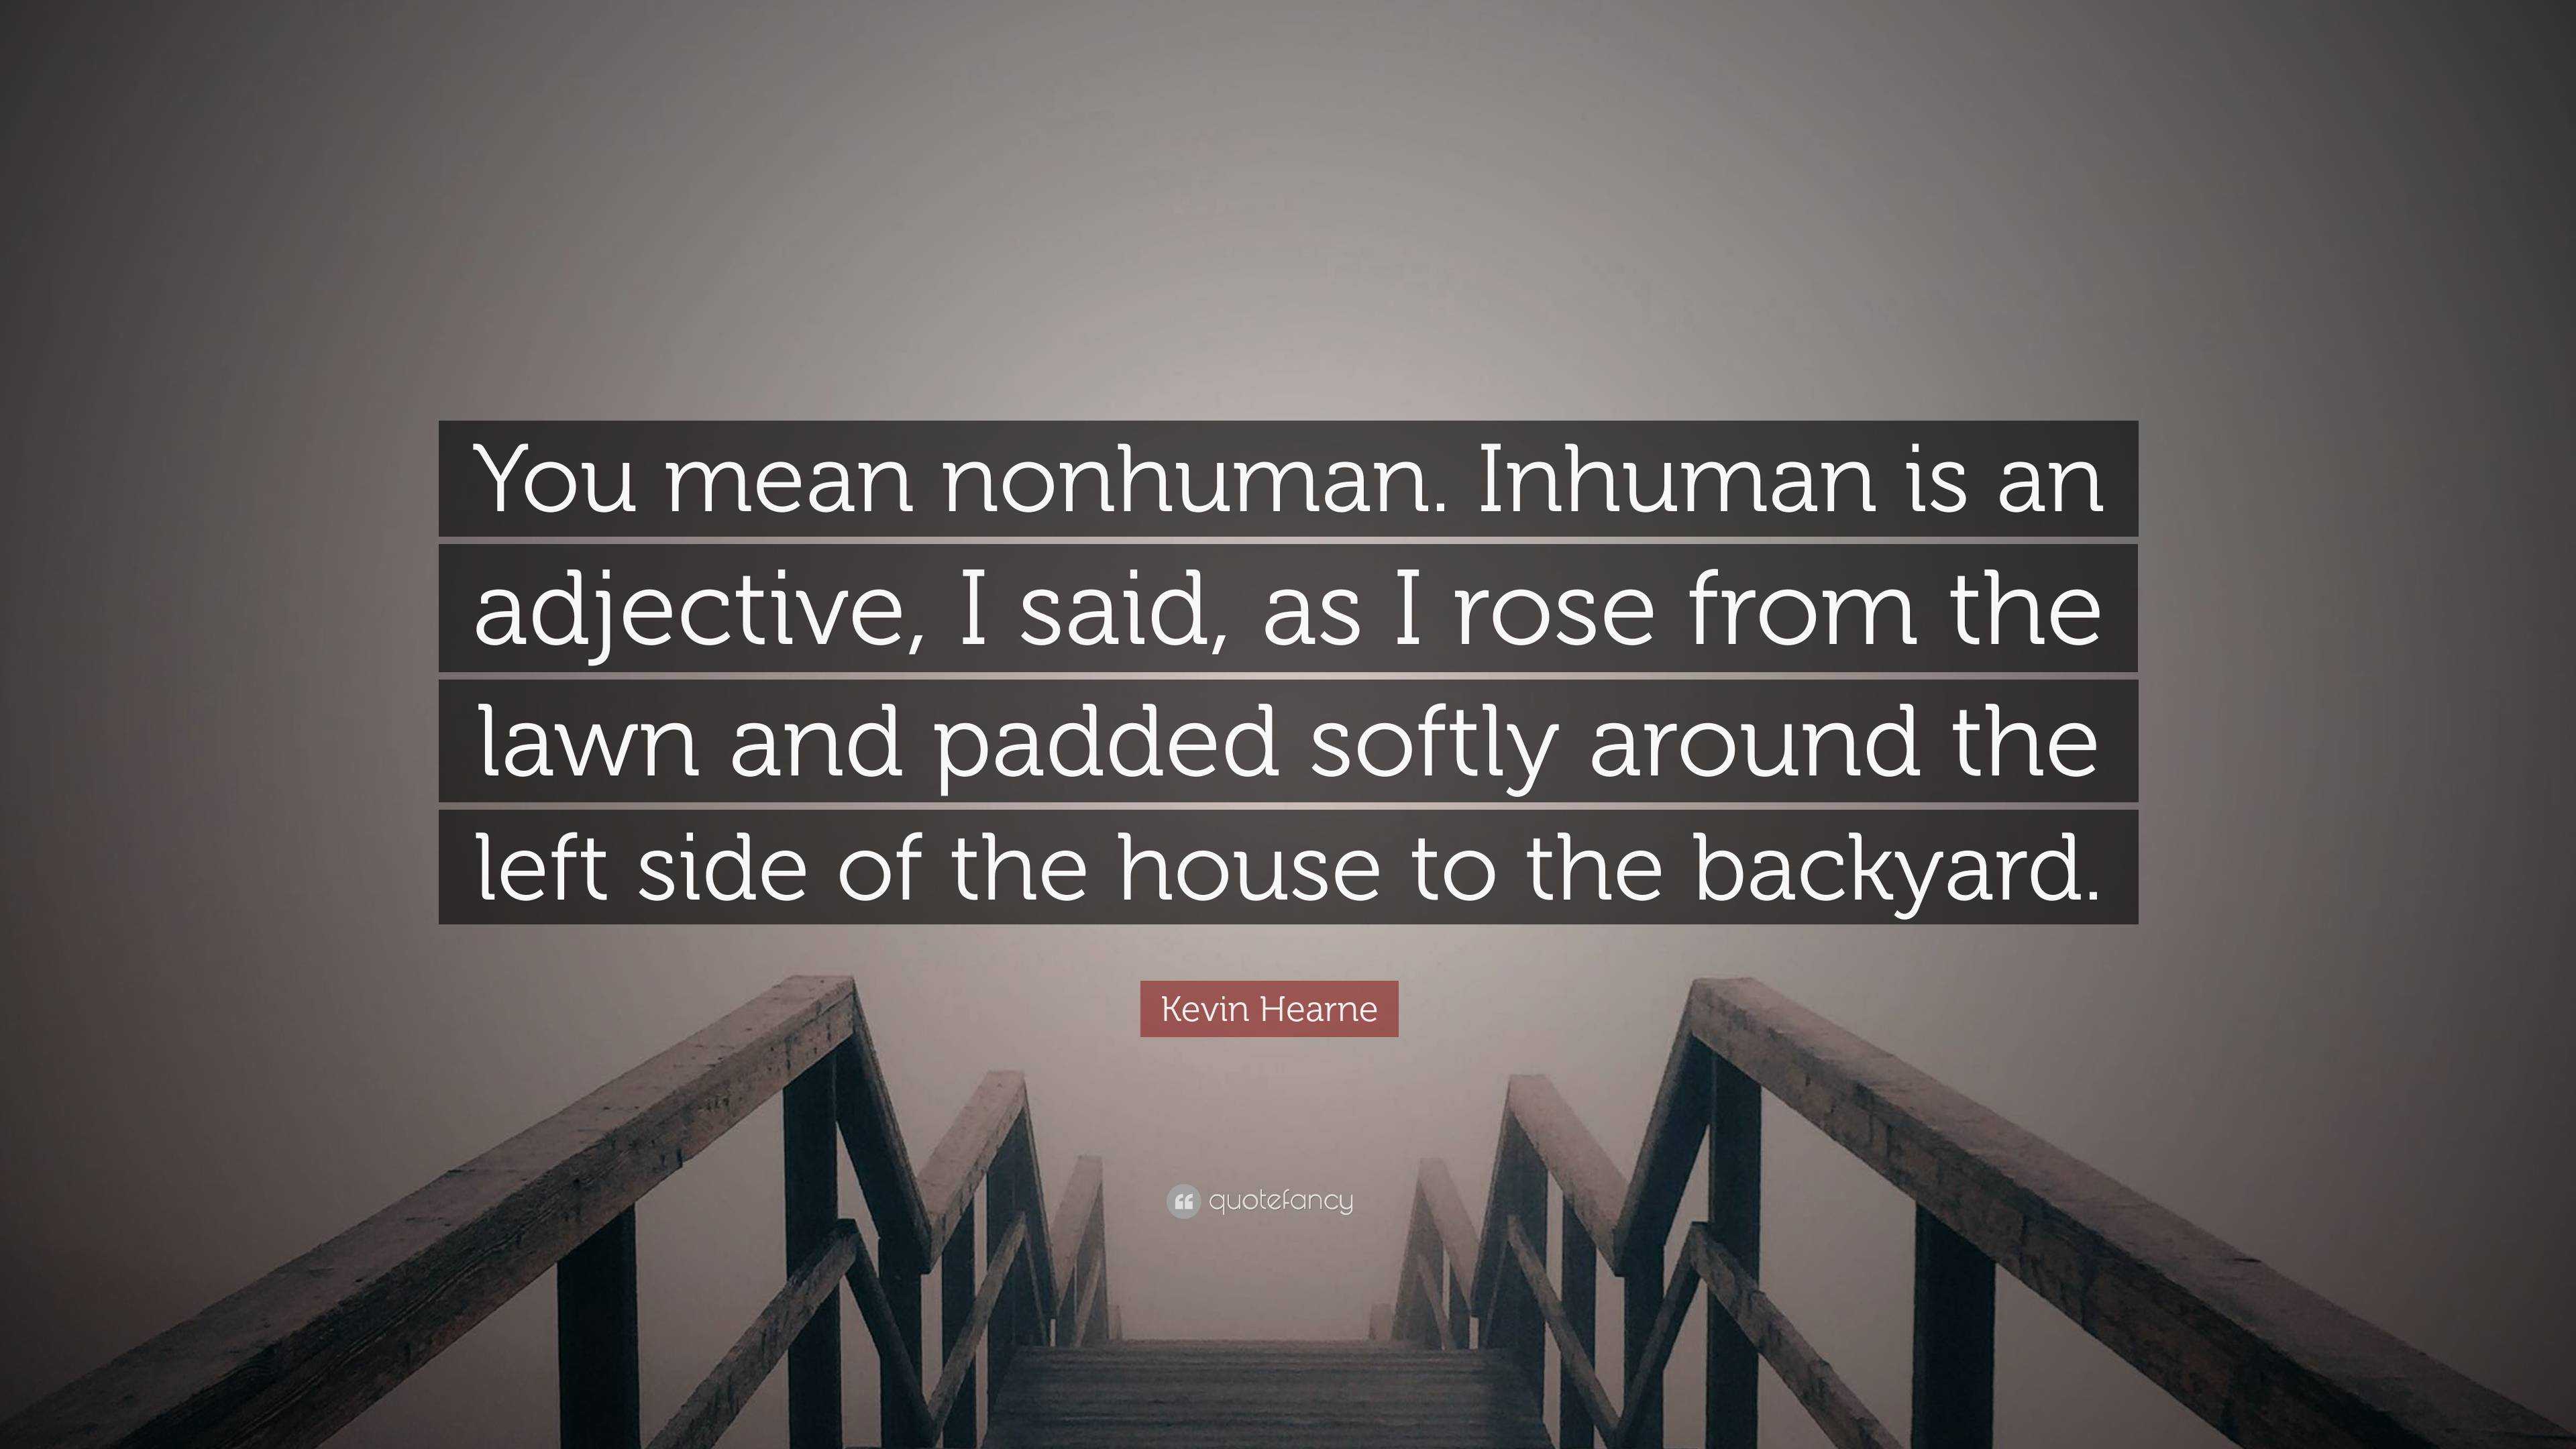 Kevin Hearne Quote: “You mean nonhuman. Inhuman is an adjective, I said, as  I rose from the lawn and padded softly around the left side of th”